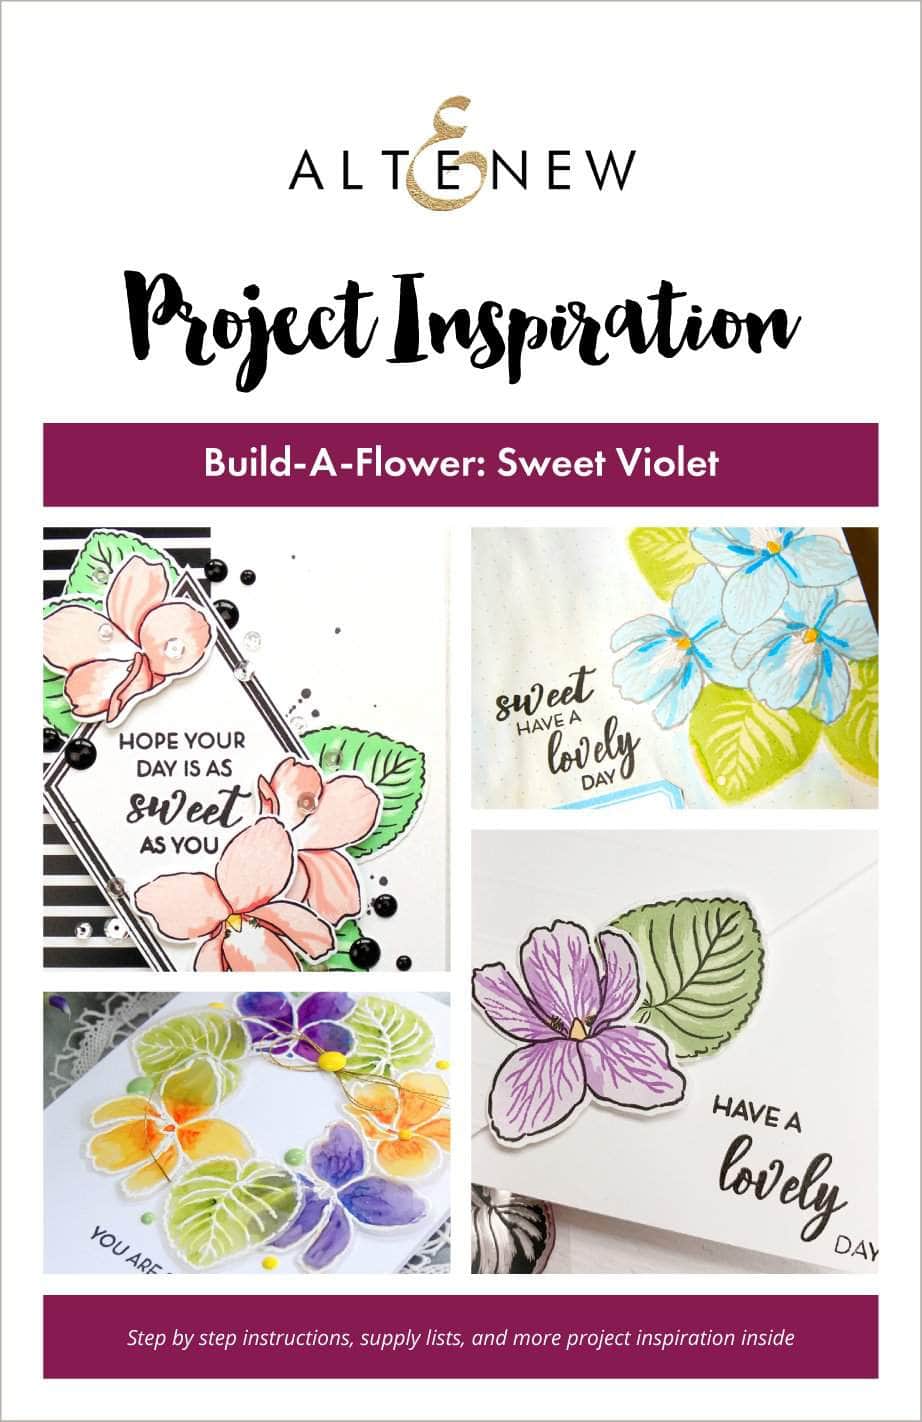 Printed Media Build-A-Flower: Sweet Violet Project Inspiration Guide